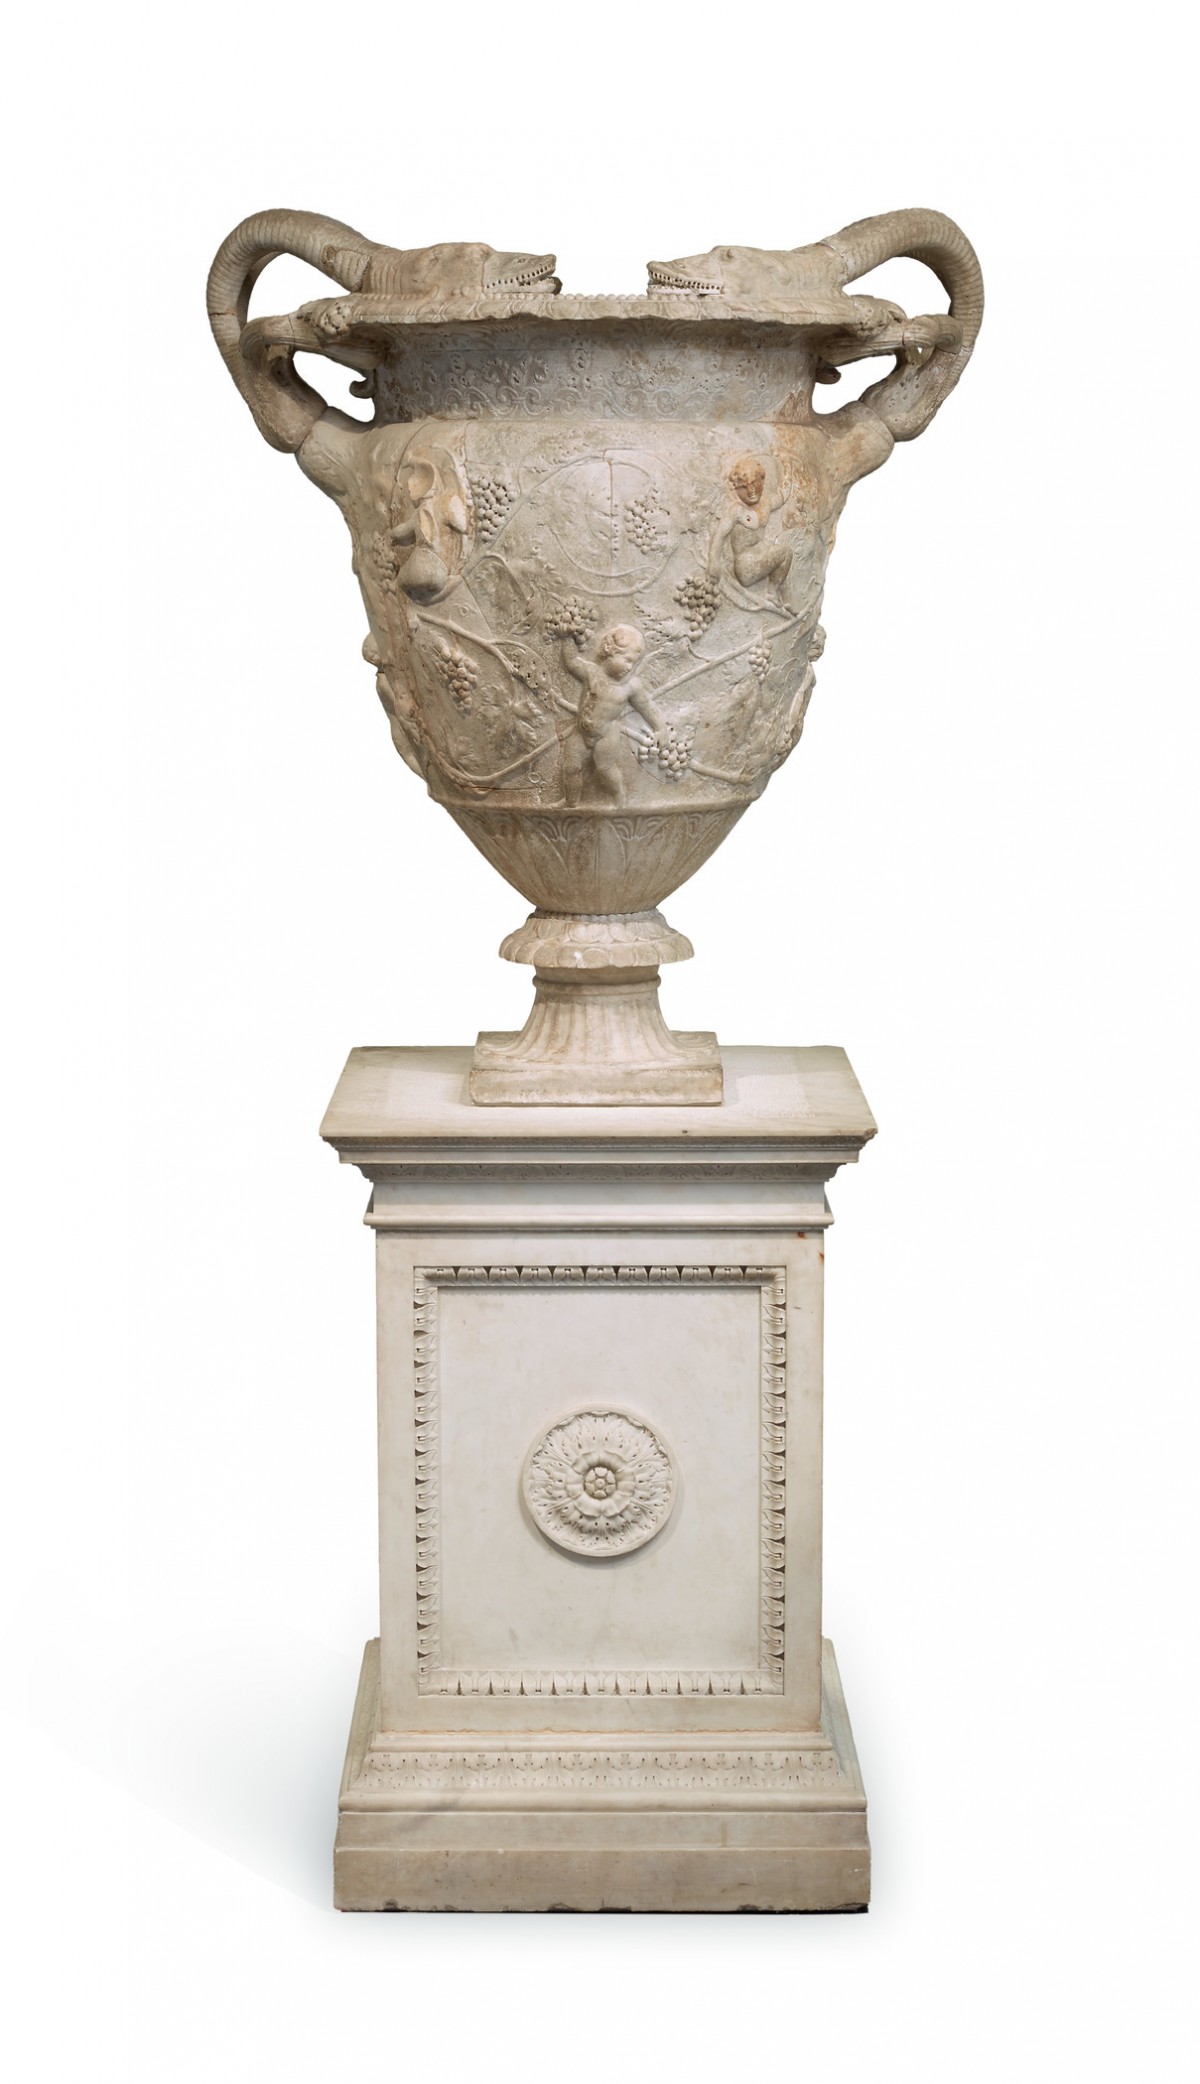 Image: The Stowe Vase, 117–138 (Hadrianic period), fragments excavated 1769 and reconstituted before 1774